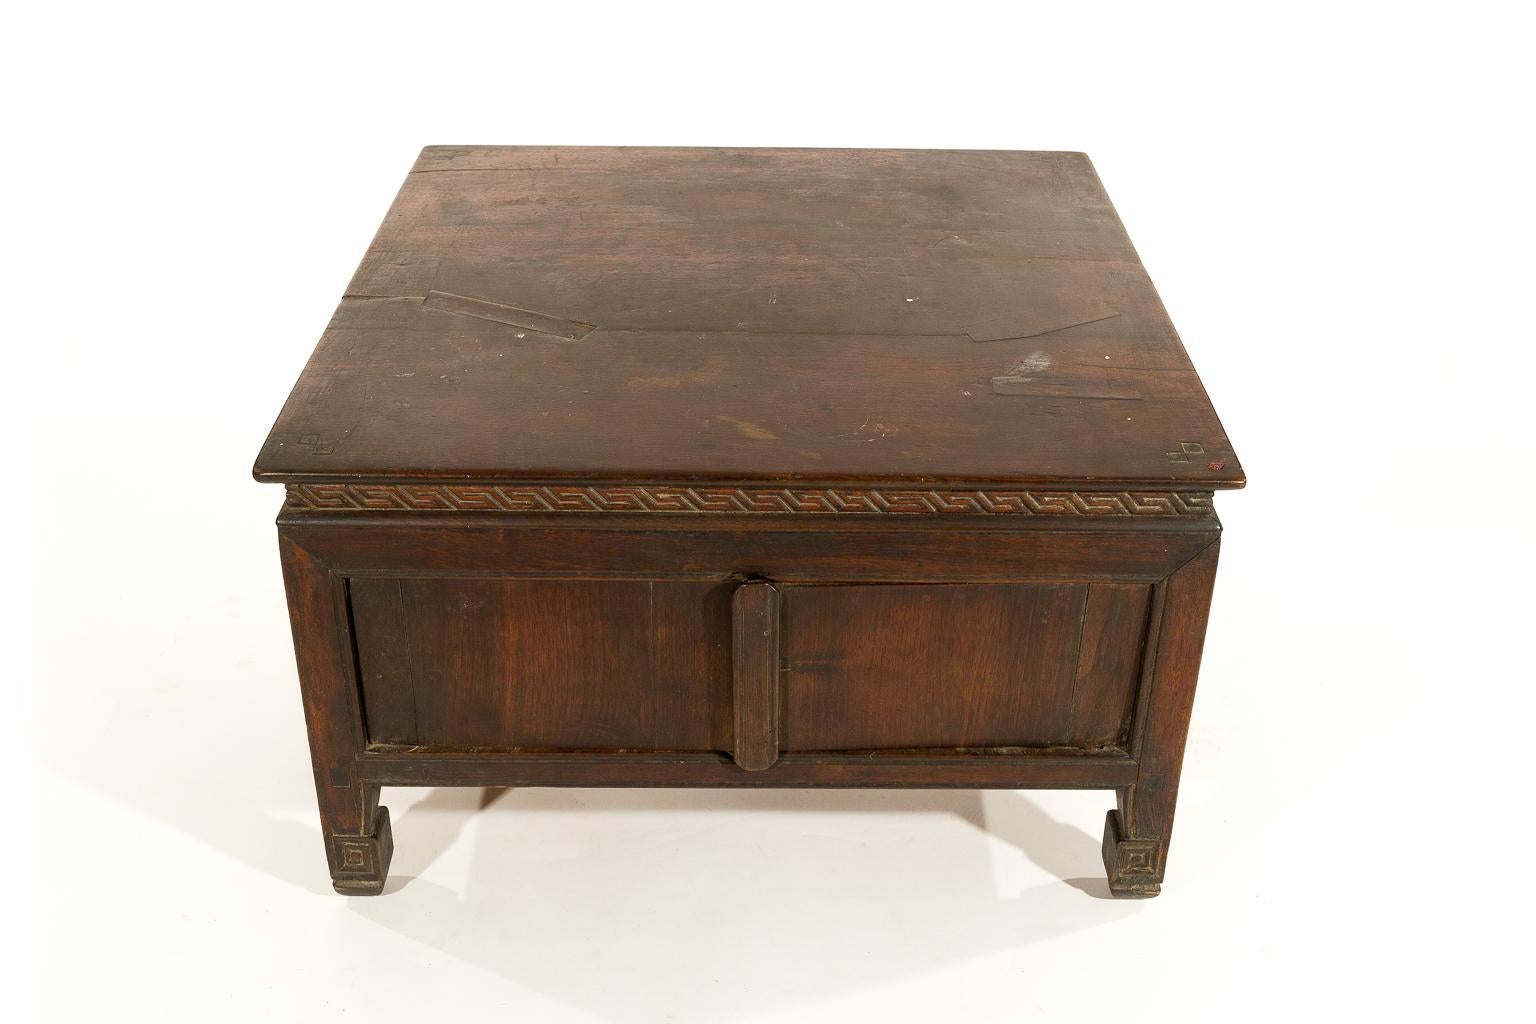 A handmade antique Tibetan tea or coffee table with carved details on the legs and around the tabletop. The table has doors that open into a storage area. It is very rustic as it came from a wealthy Tibetan household in the western part of Tibet.